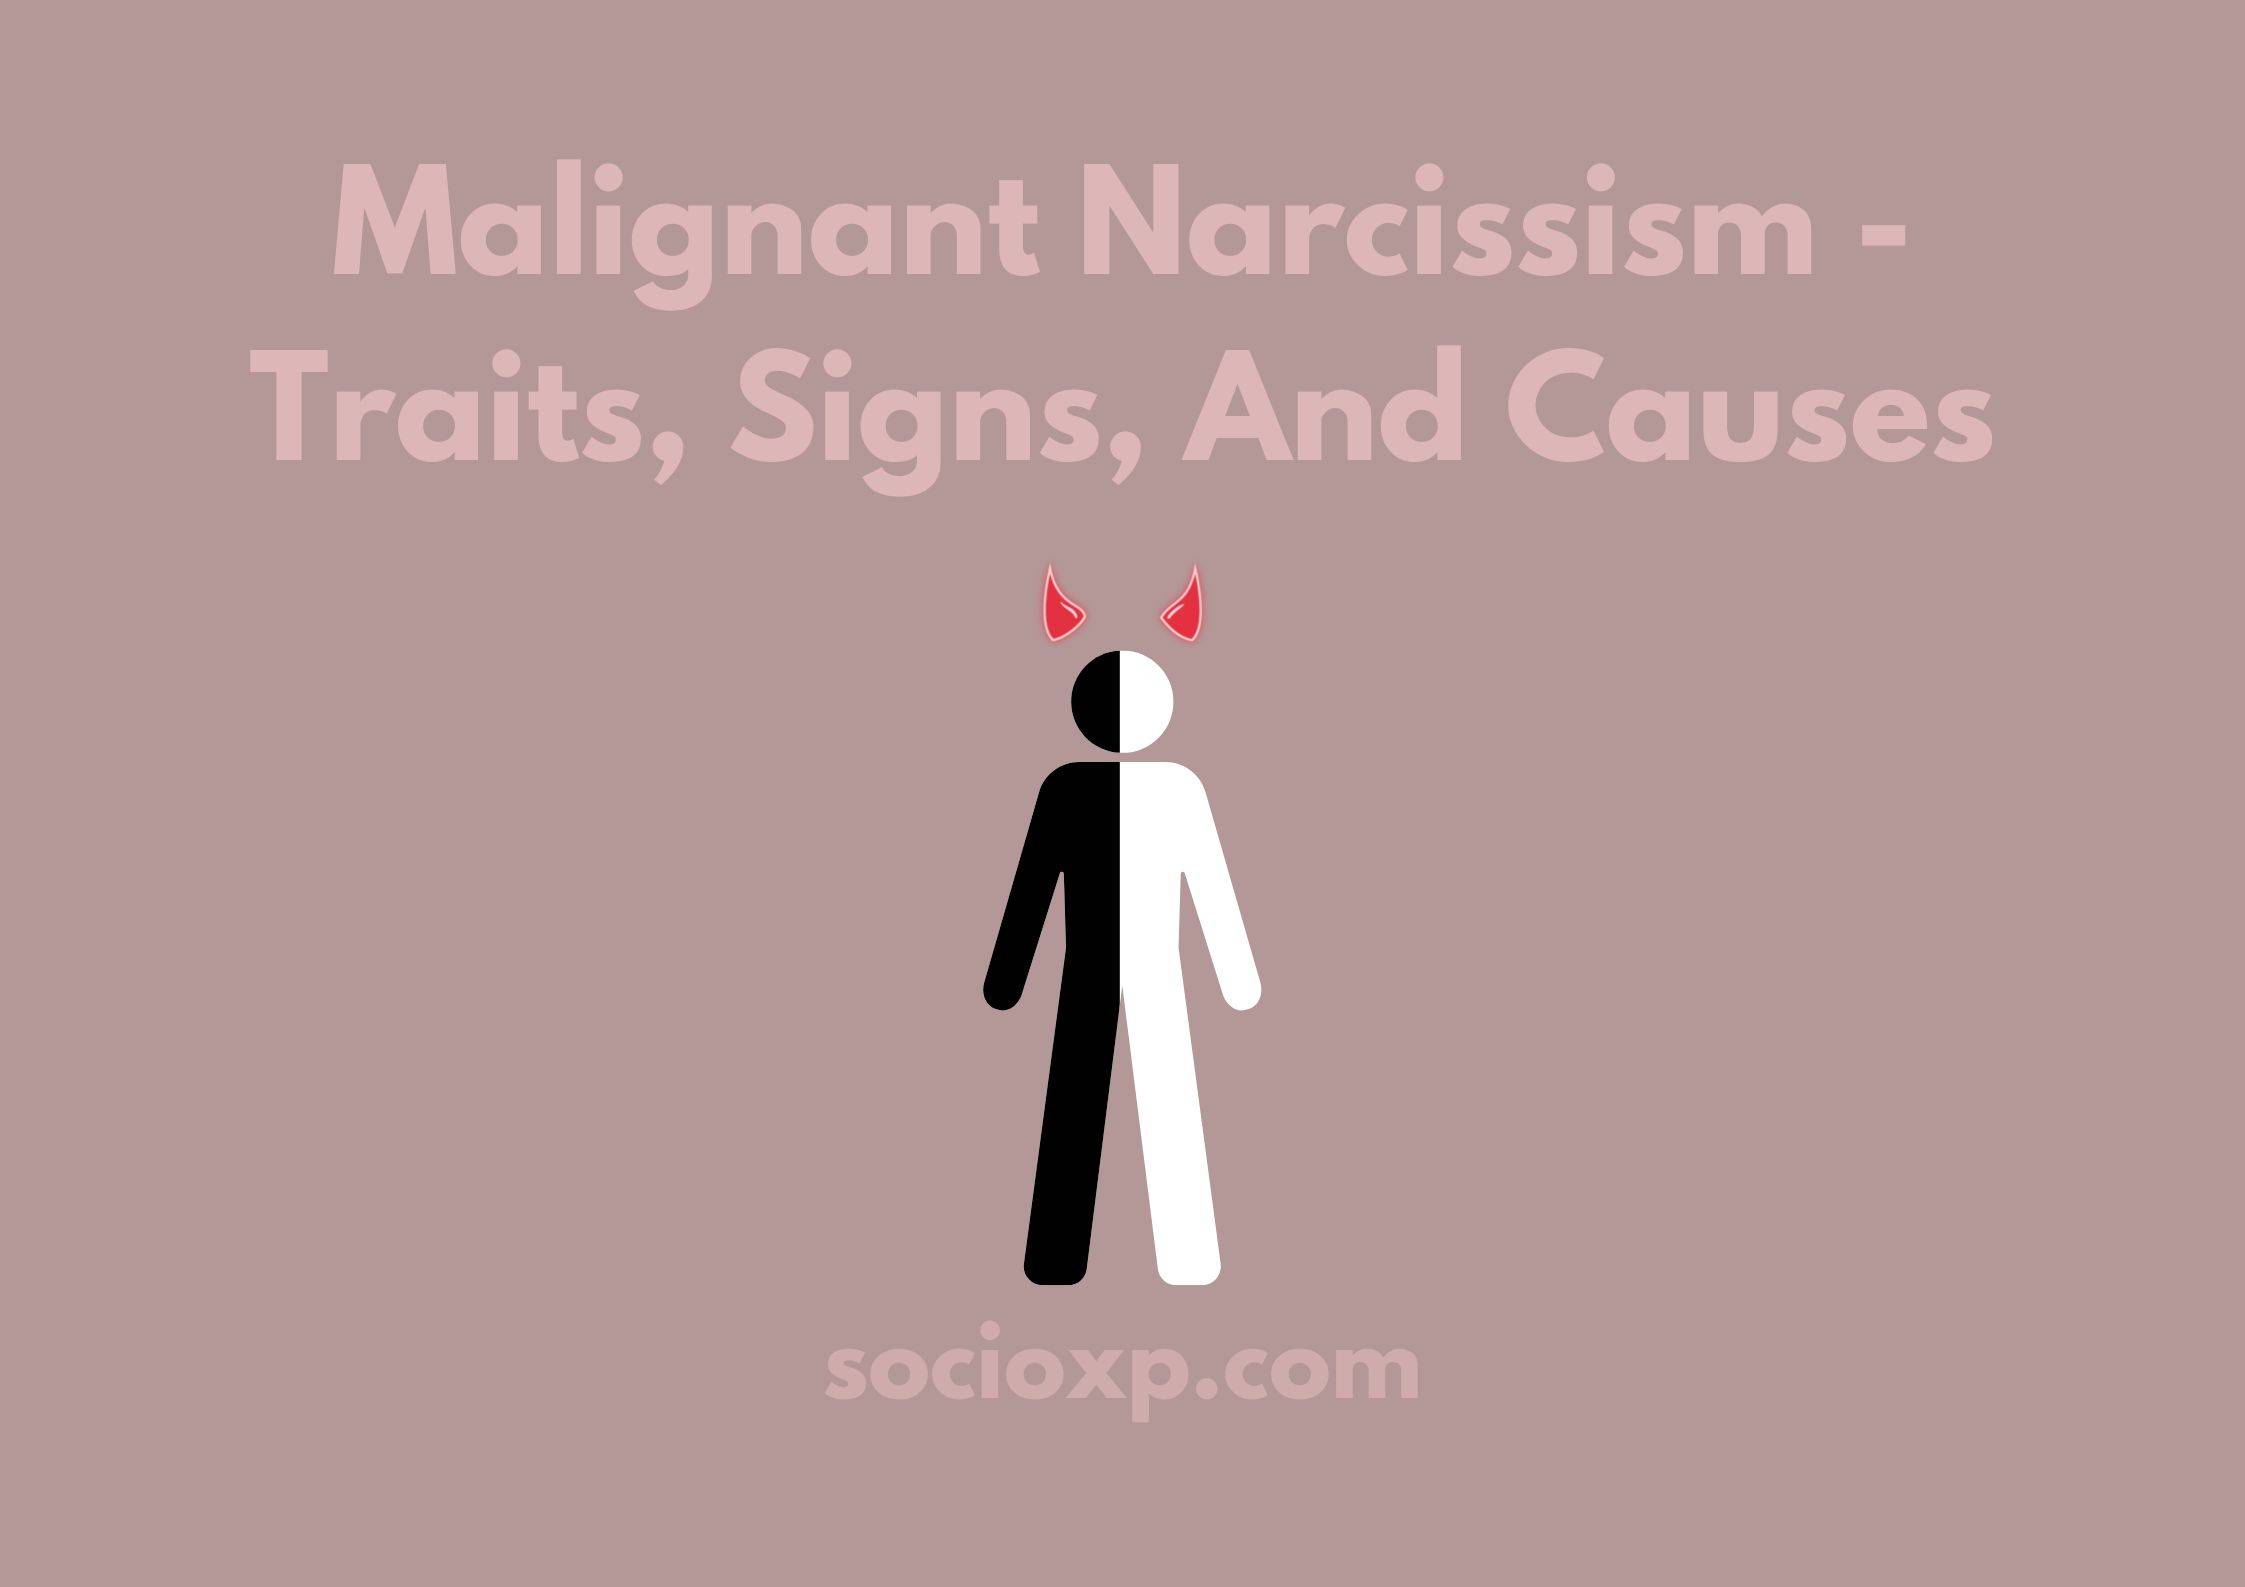 Malignant Narcissism - Traits, Signs, And Causes